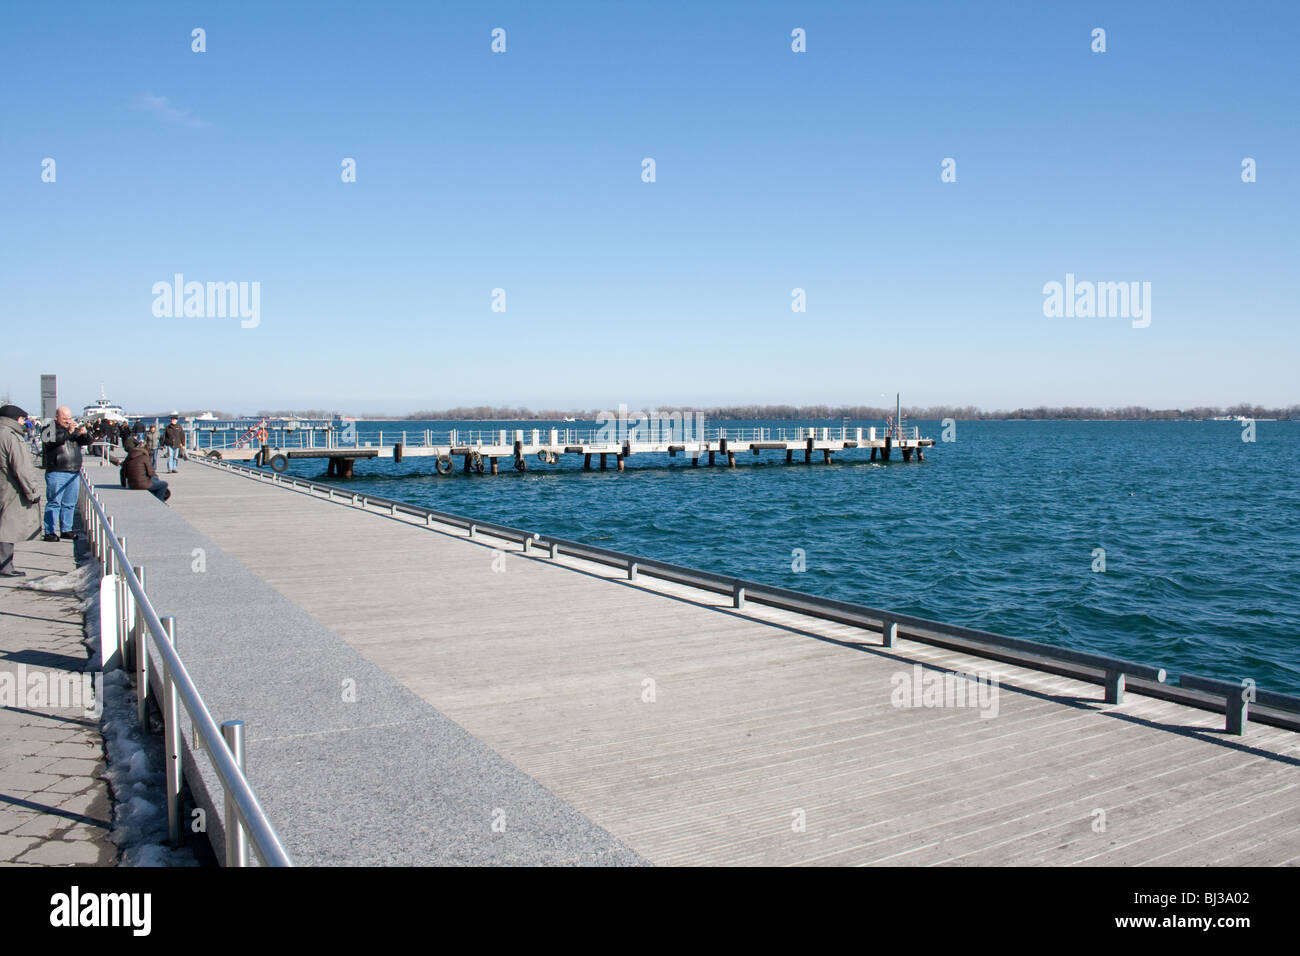 Walkway at the harborfront during a sunny winter afternoon Stock Photo